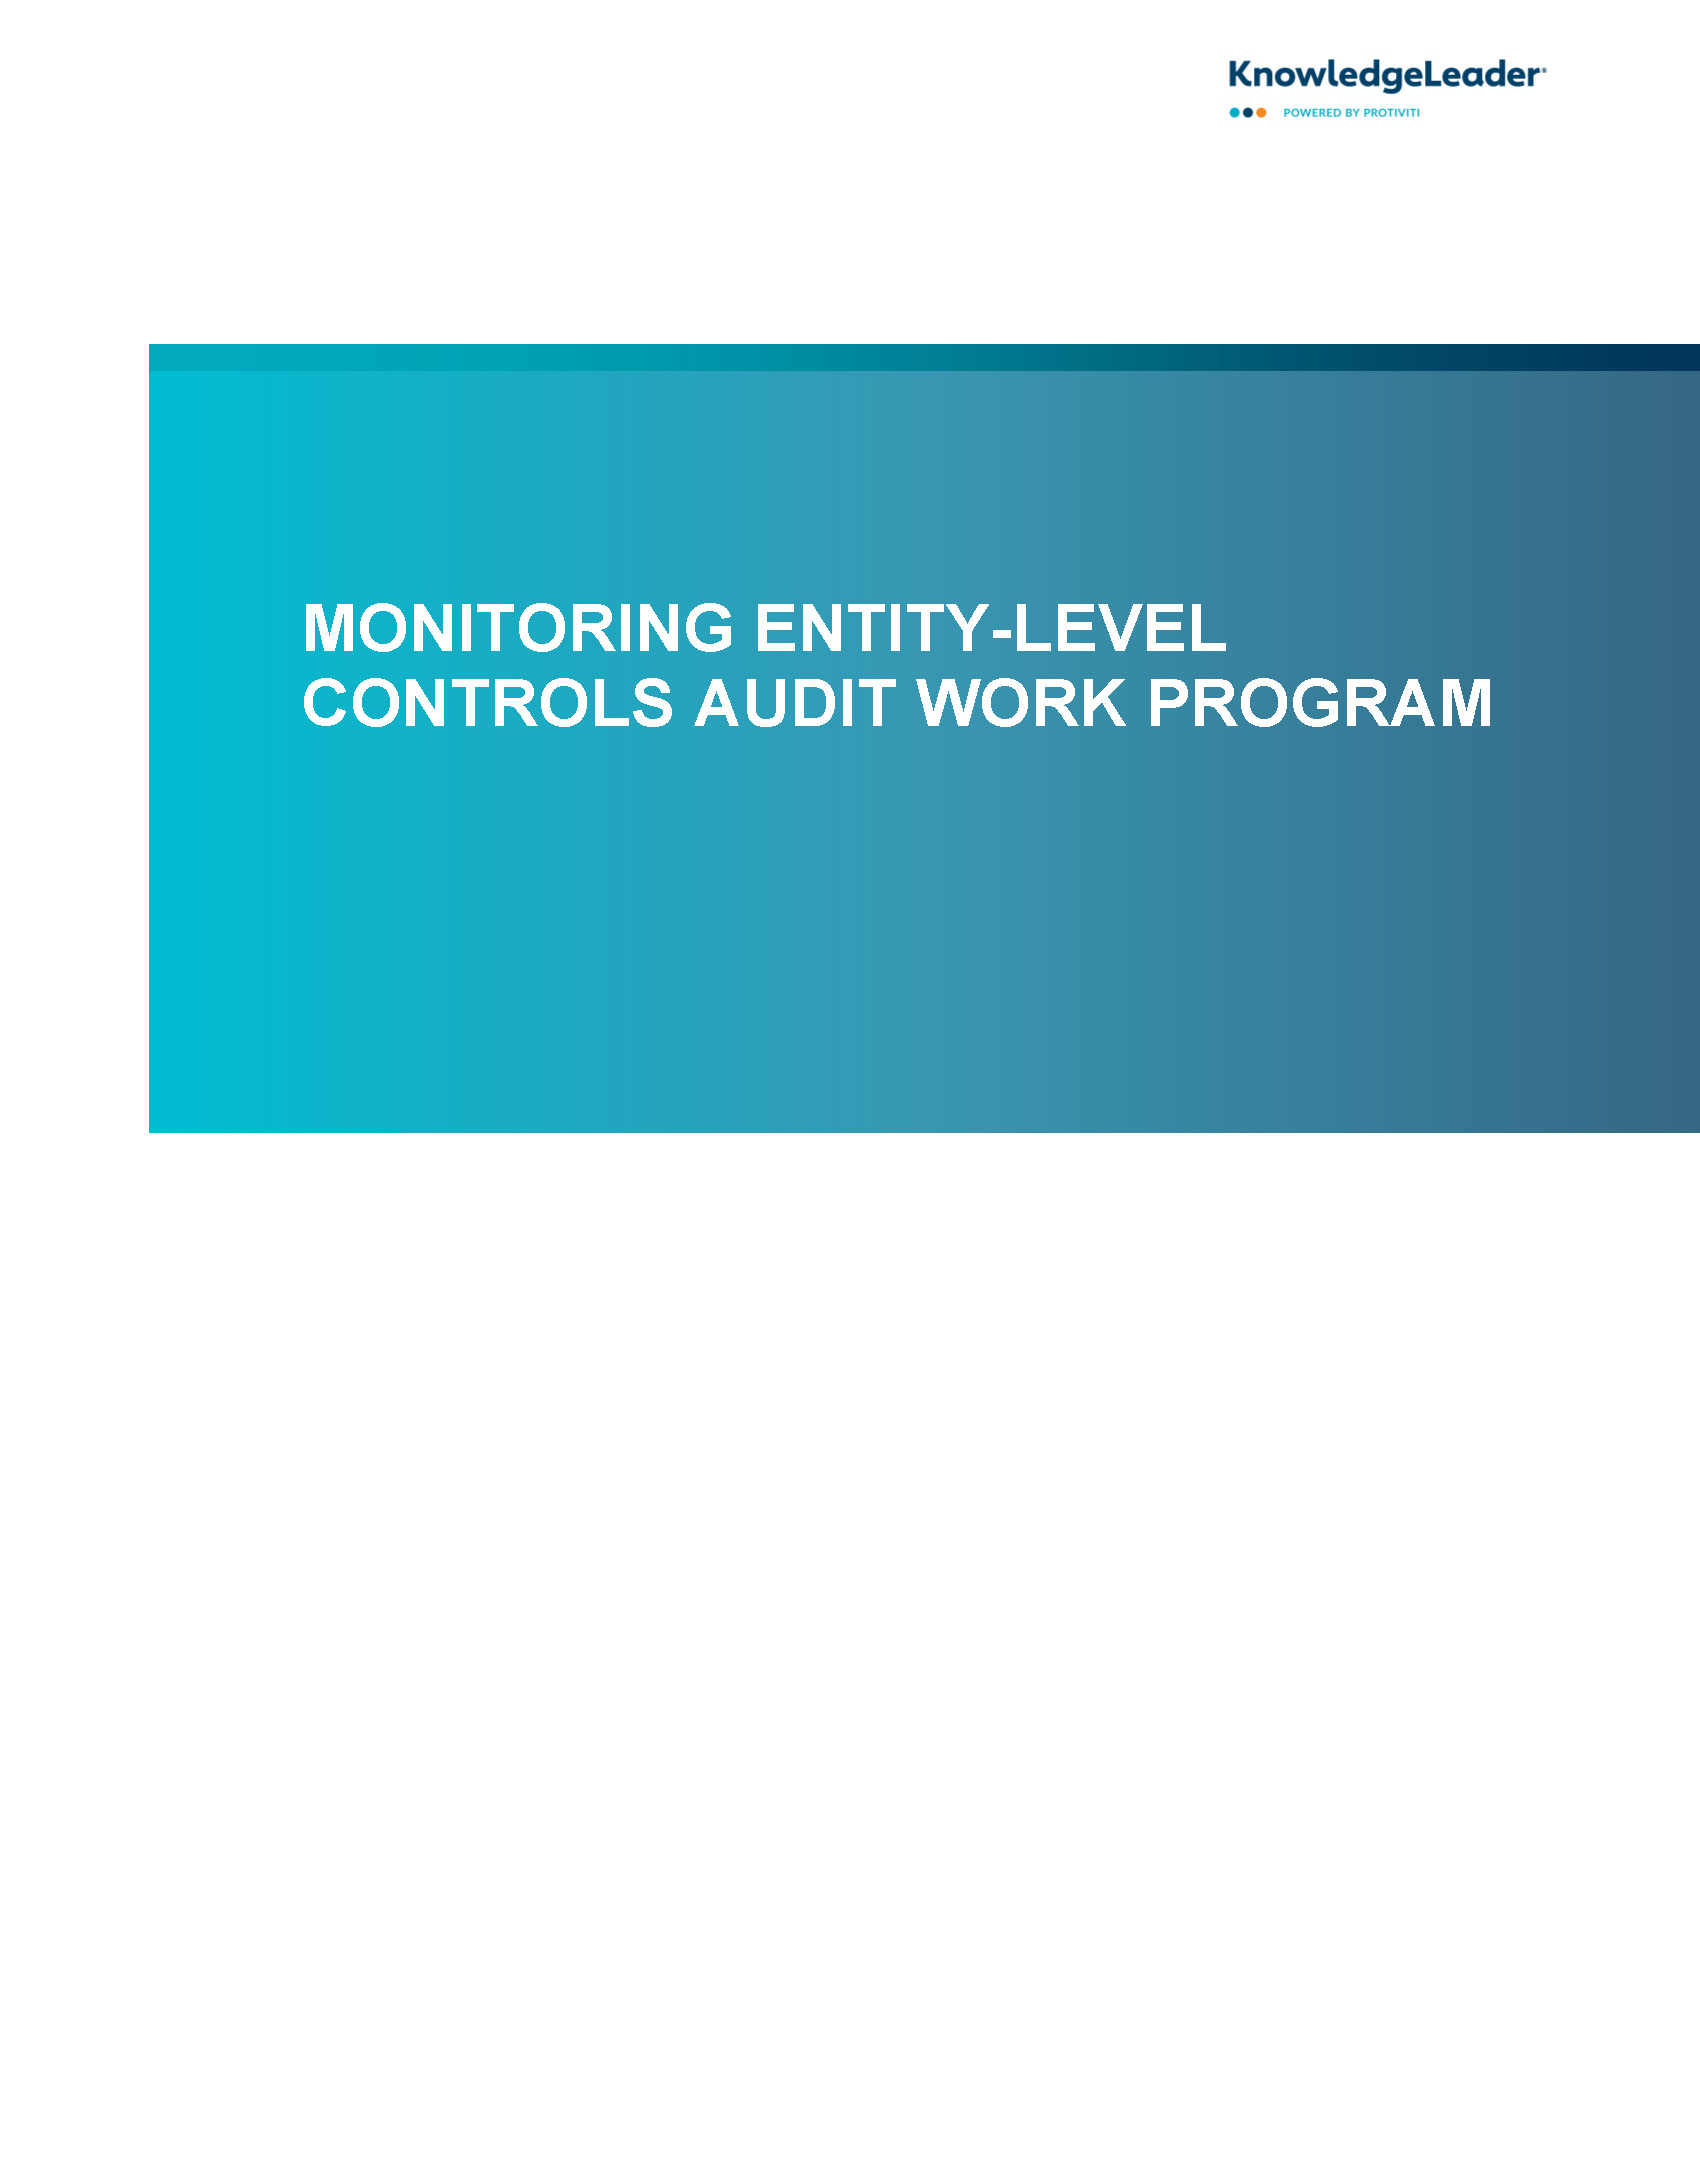 Screenshot of the first page of Monitoring Entity-Level Controls Audit Work Program